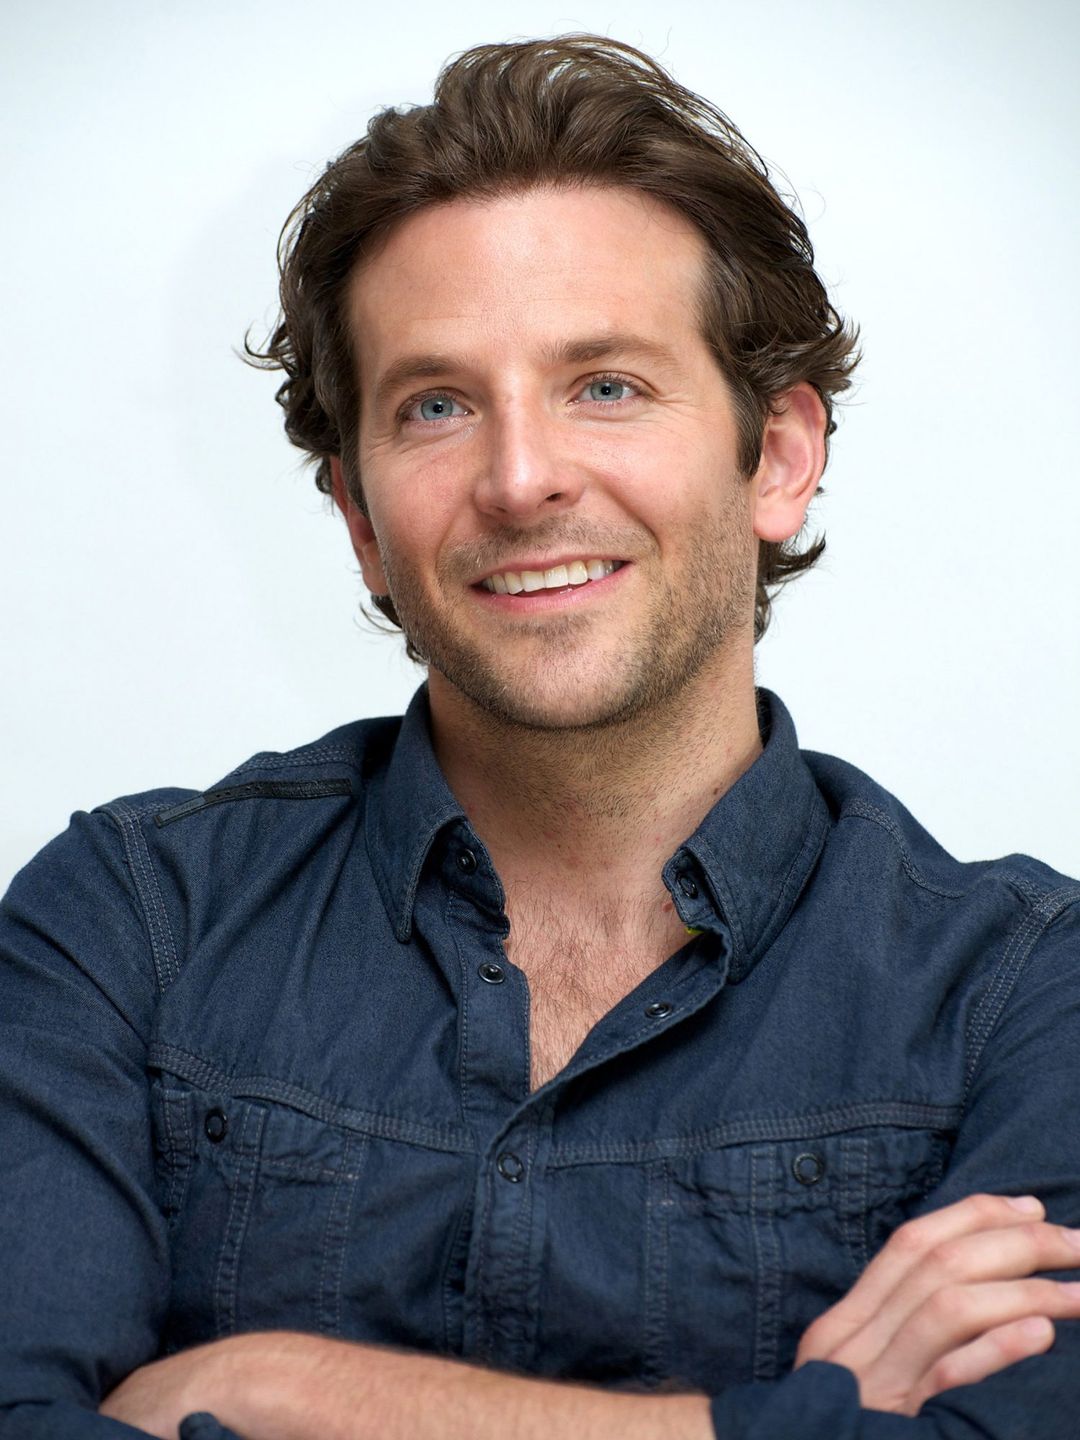 Bradley Cooper who is his mother